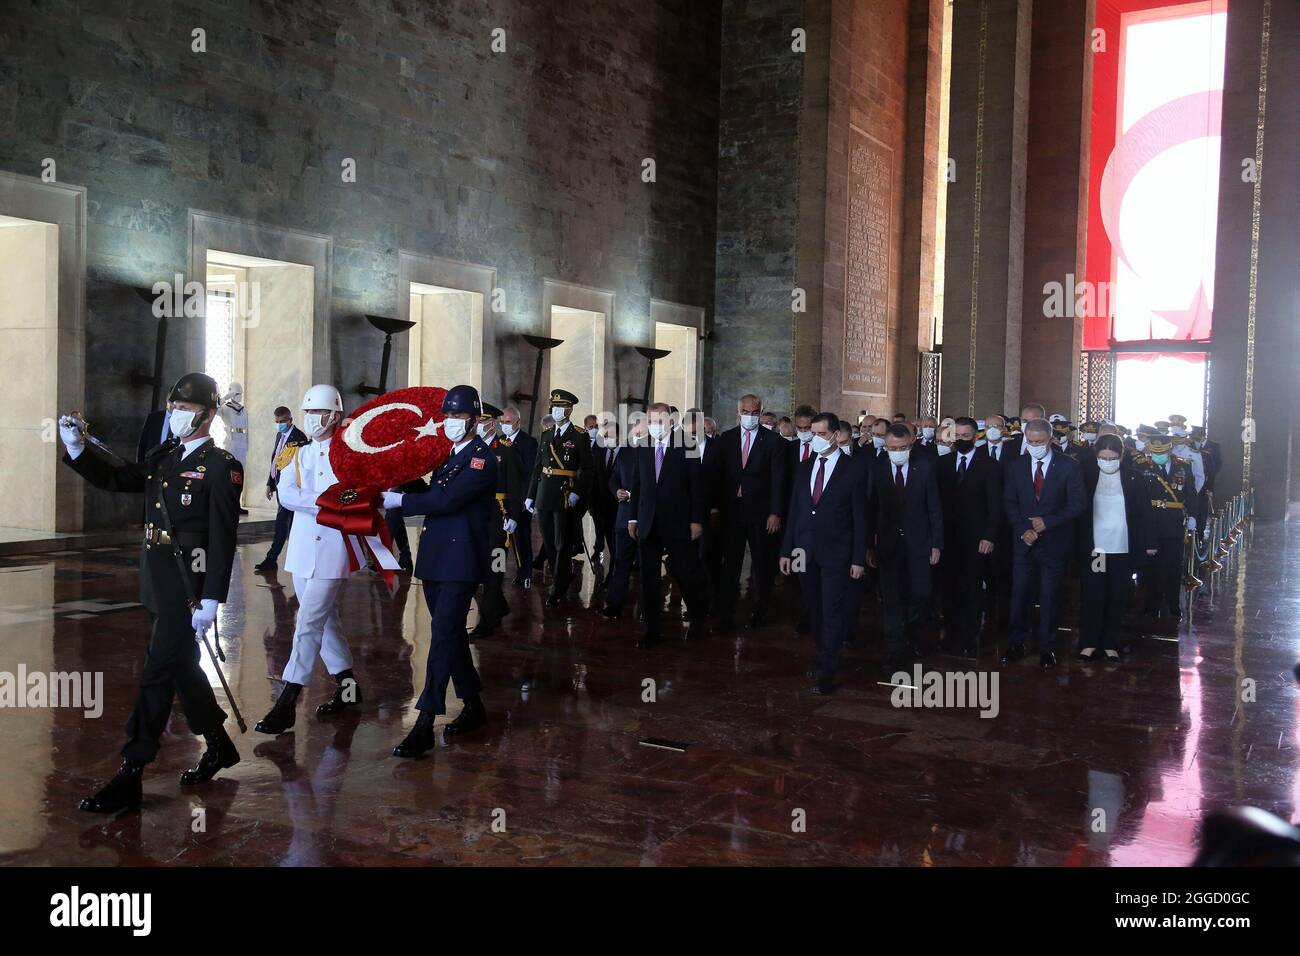 Ankara, Turkey. 30th Aug, 2021. Turkish President Tayyip Erdogan attends a ceremony marking the 99th anniversary of Victory Day at the Ataturk Mausoleum in Ankara, Turkey, on Aug. 30, 2021. Turkey on Monday celebrated the 99th anniversary of Victory Day, the day the Turks defeated the Greek forces at the Battle of Dumlupinar, the final battle of the Turkish War of Independence in 1922. Credit: Mustafa Kaya/Xinhua/Alamy Live News Stock Photo